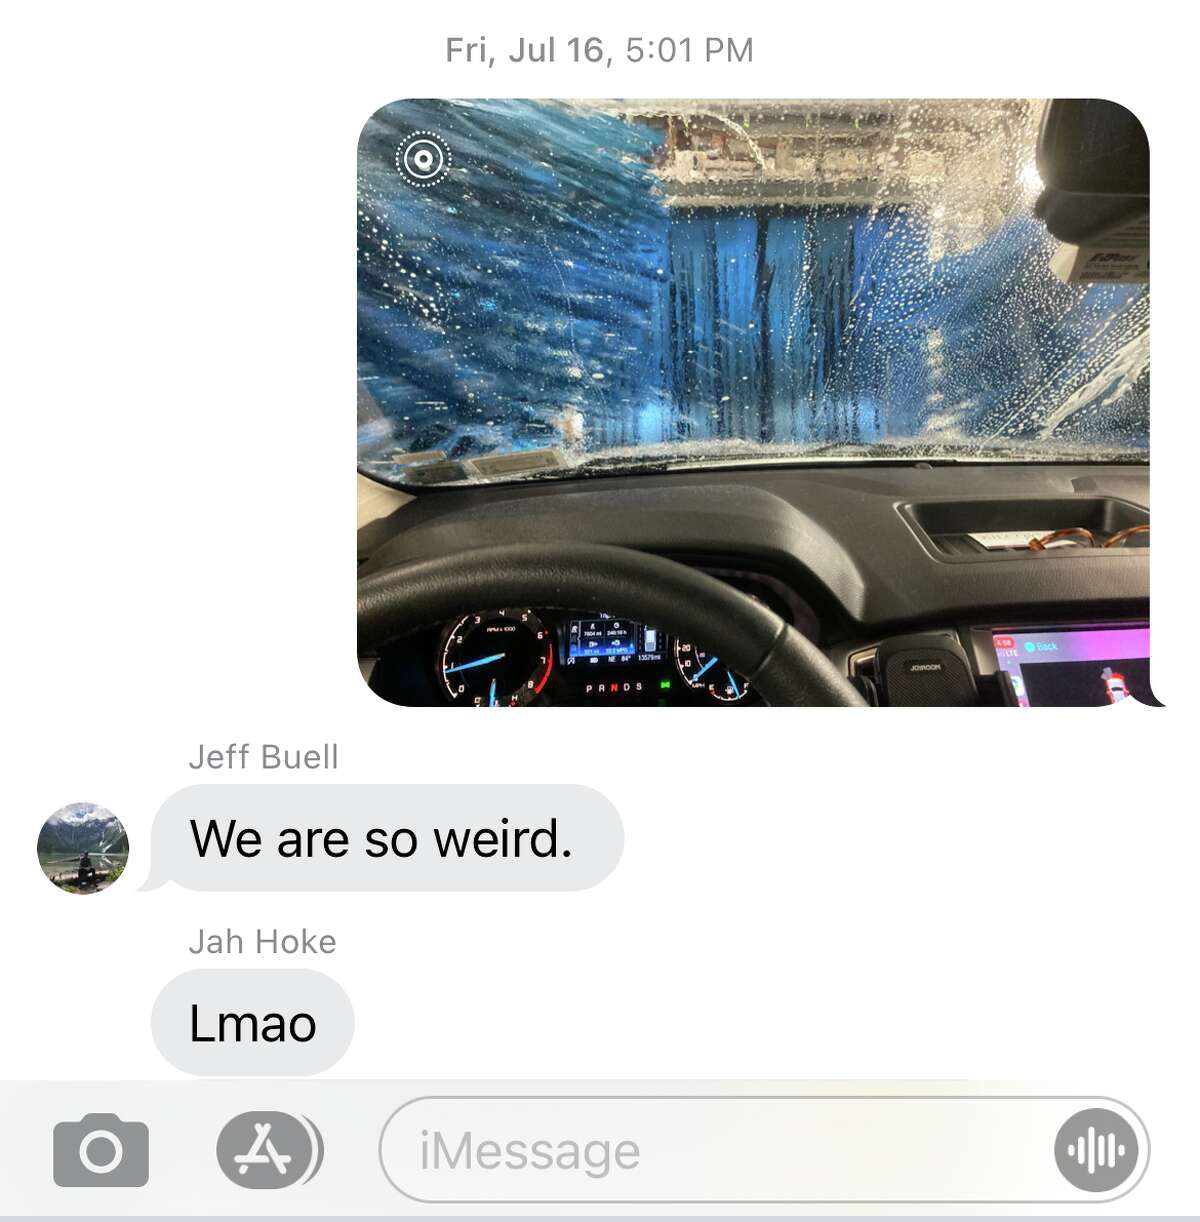 1. I hate cars, but I love the car wash. I think cars ruined pretty much everything, but I have an unlimited car wash pass and anytime I am stressed out I go get a car wash. When something is annoying me, I just text my friends a photo of me going through the car wash and they know I am going through a thing.